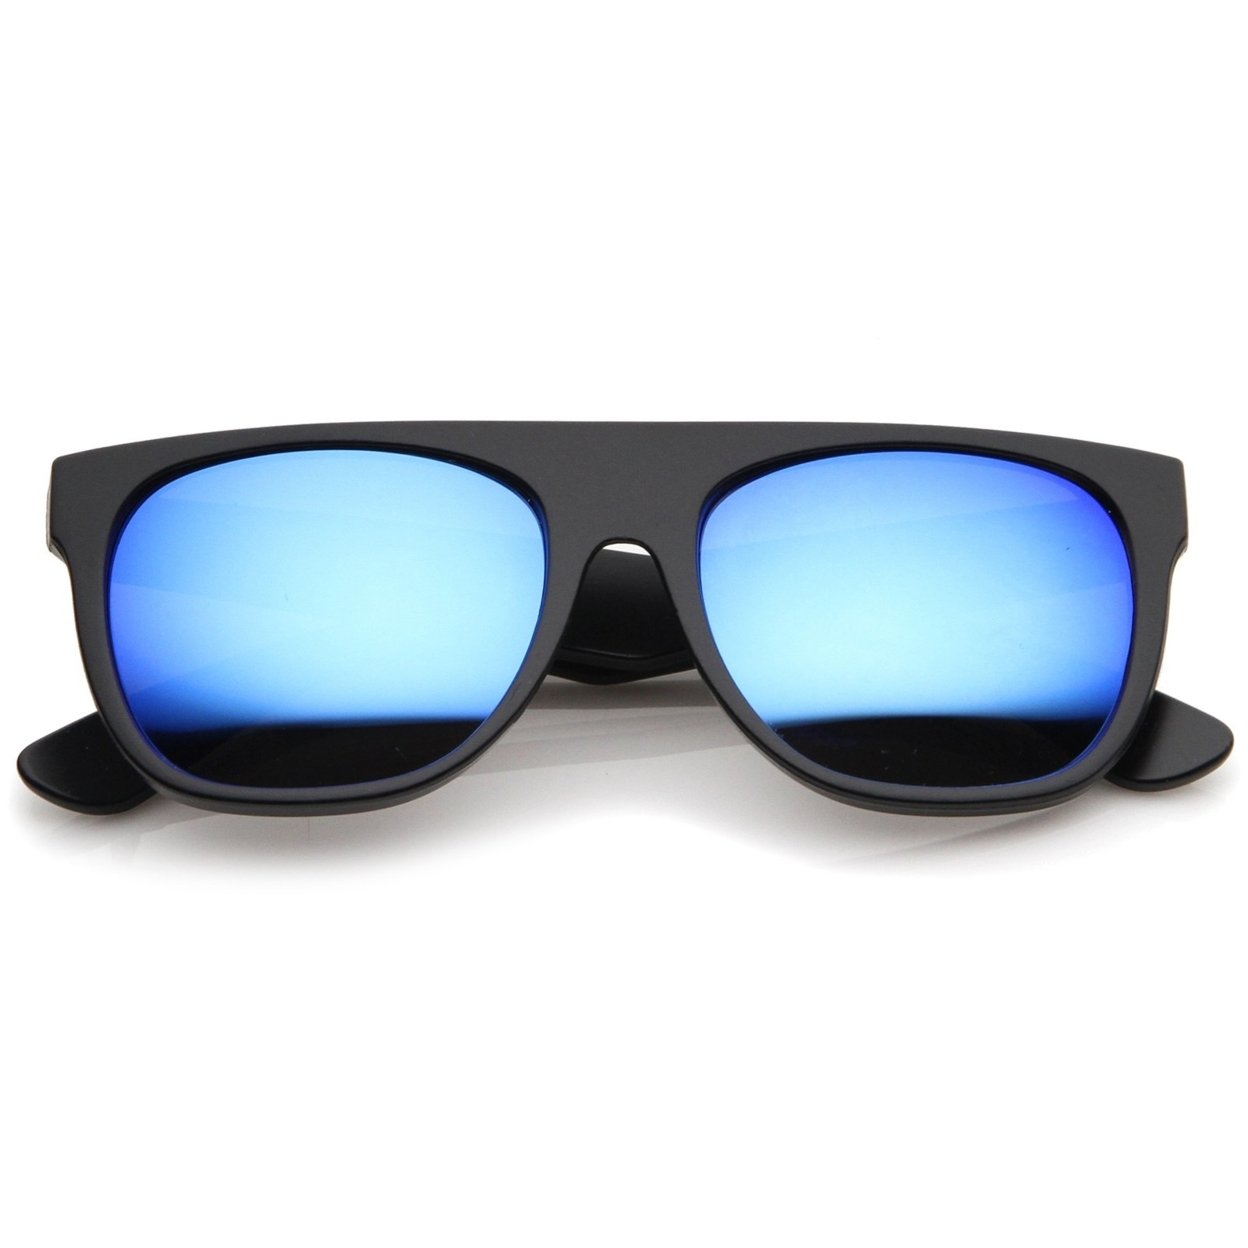 Modern Super Flat-Top Wide Temple Colored Mirror Lens Horn Rimmed Sunglasses 55mm - Shiny White / Blue Mirror